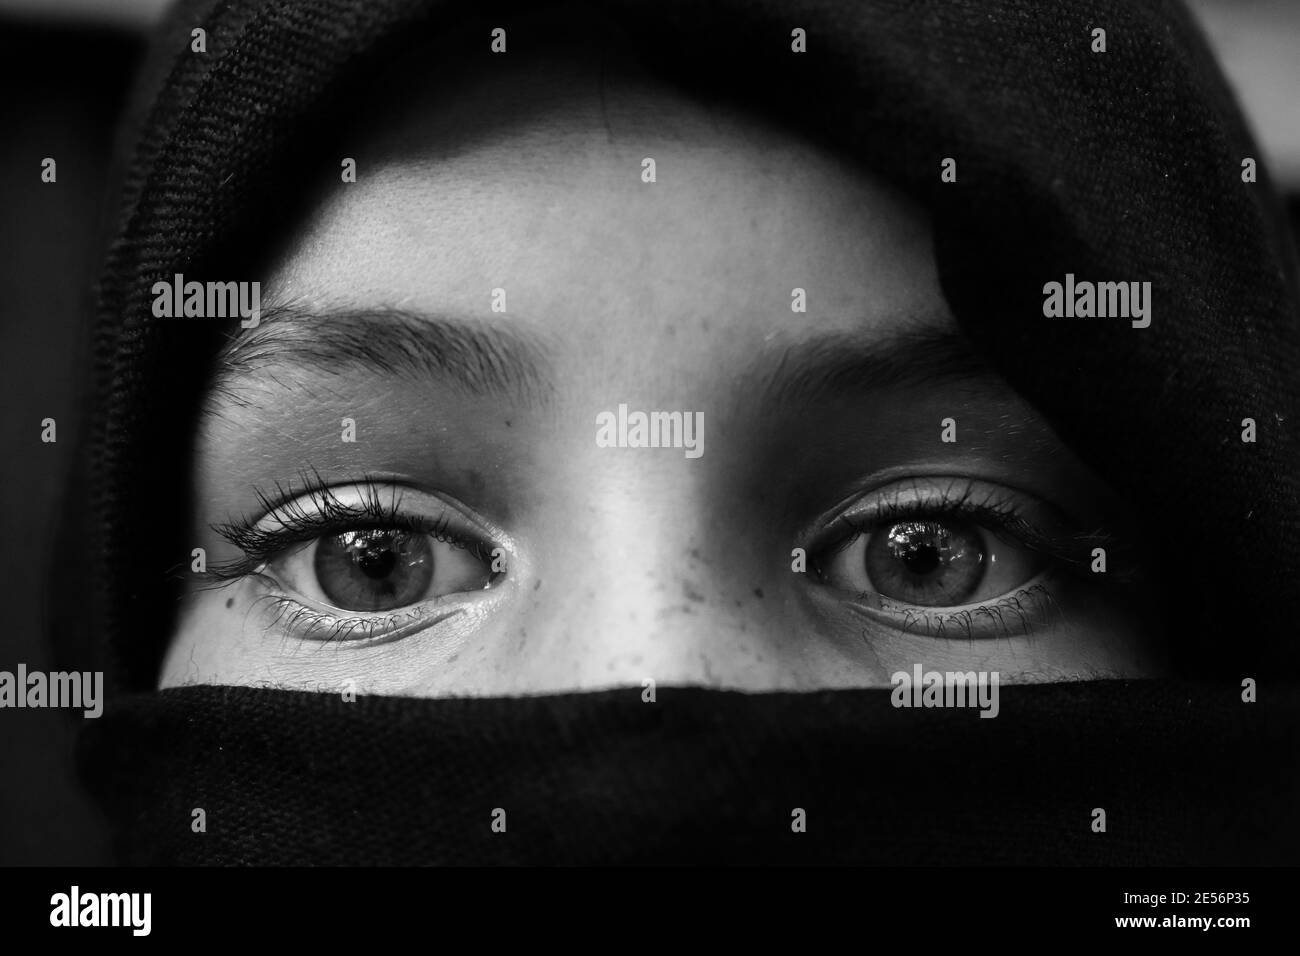 Black and white portrait of a person with face covering Stock Photo